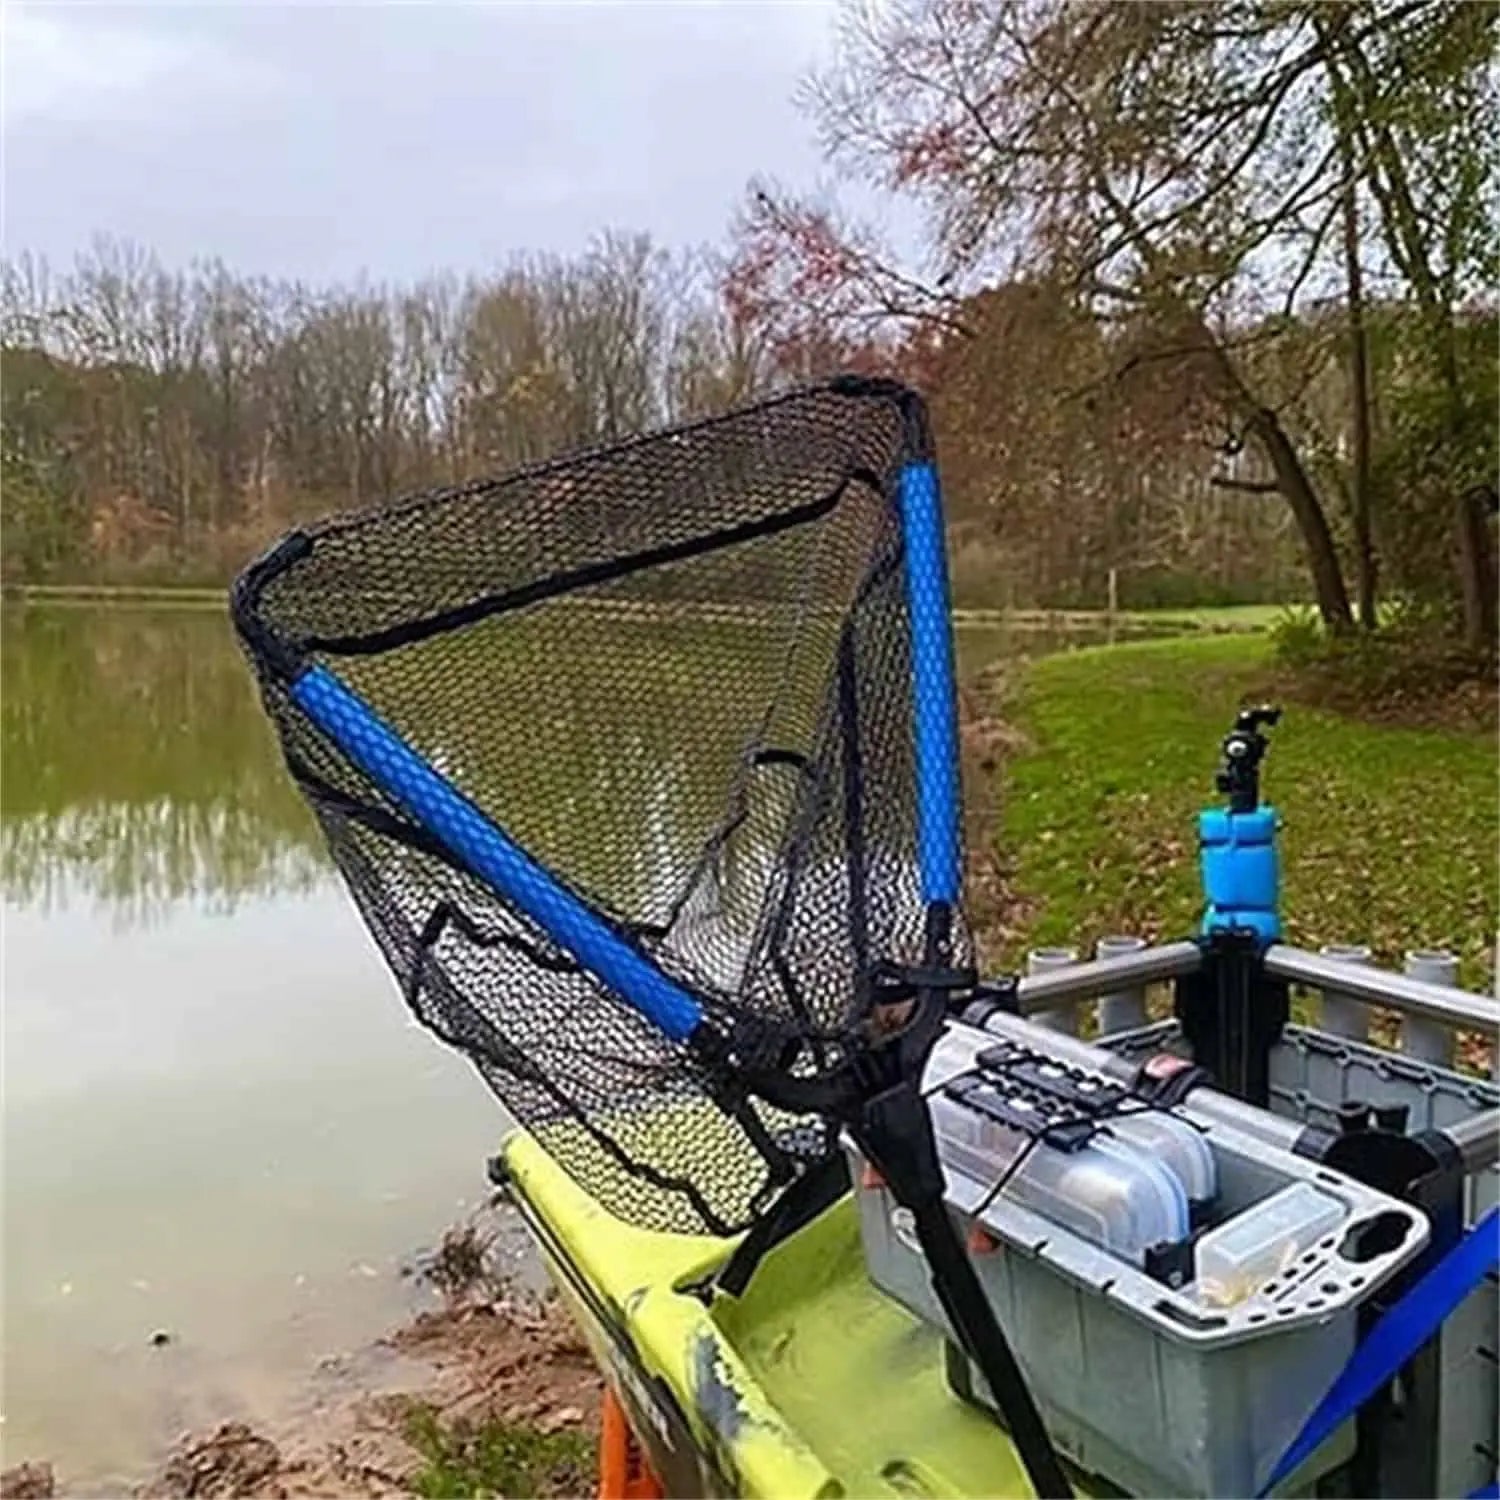 PLUSINNO FN3 Triangular Floating Fish Landing Net with Fixed Pole